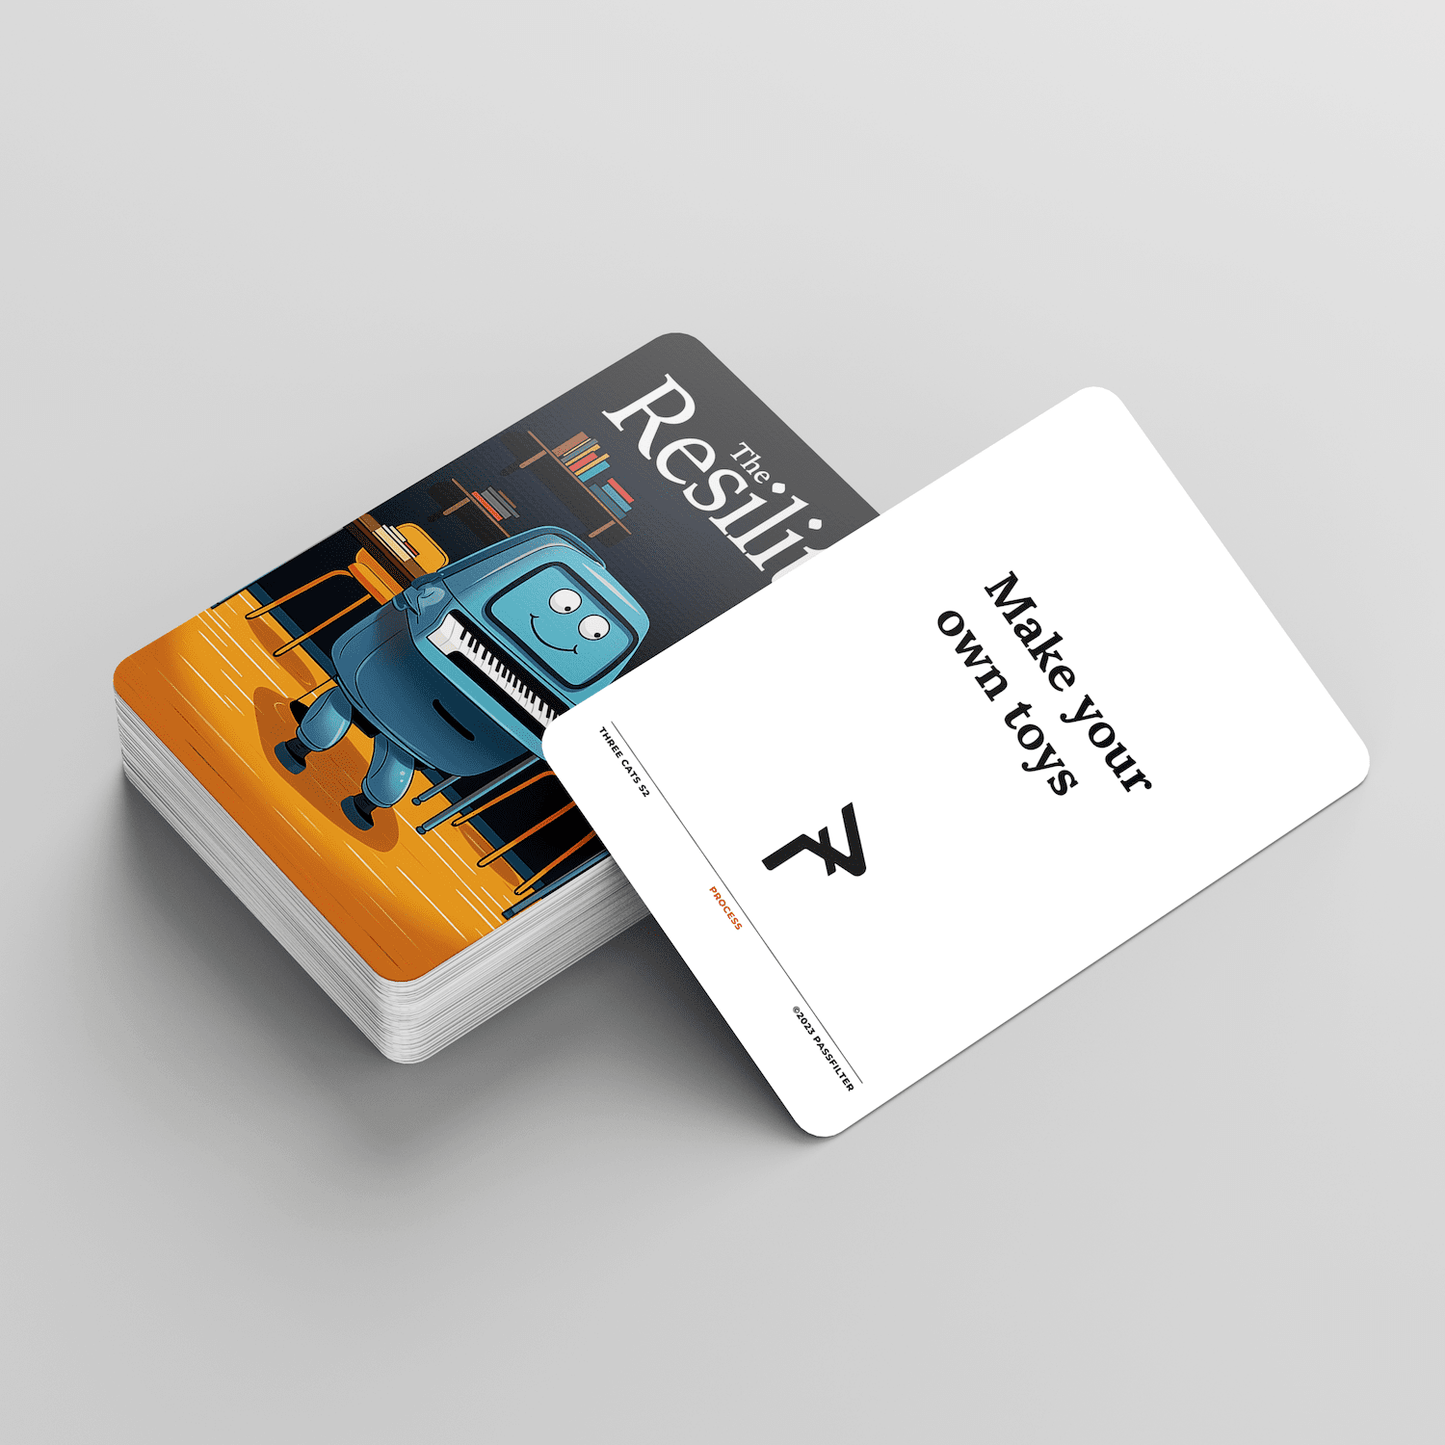 Three Cats Series Two: The Resiliter Card Deck for Musicians